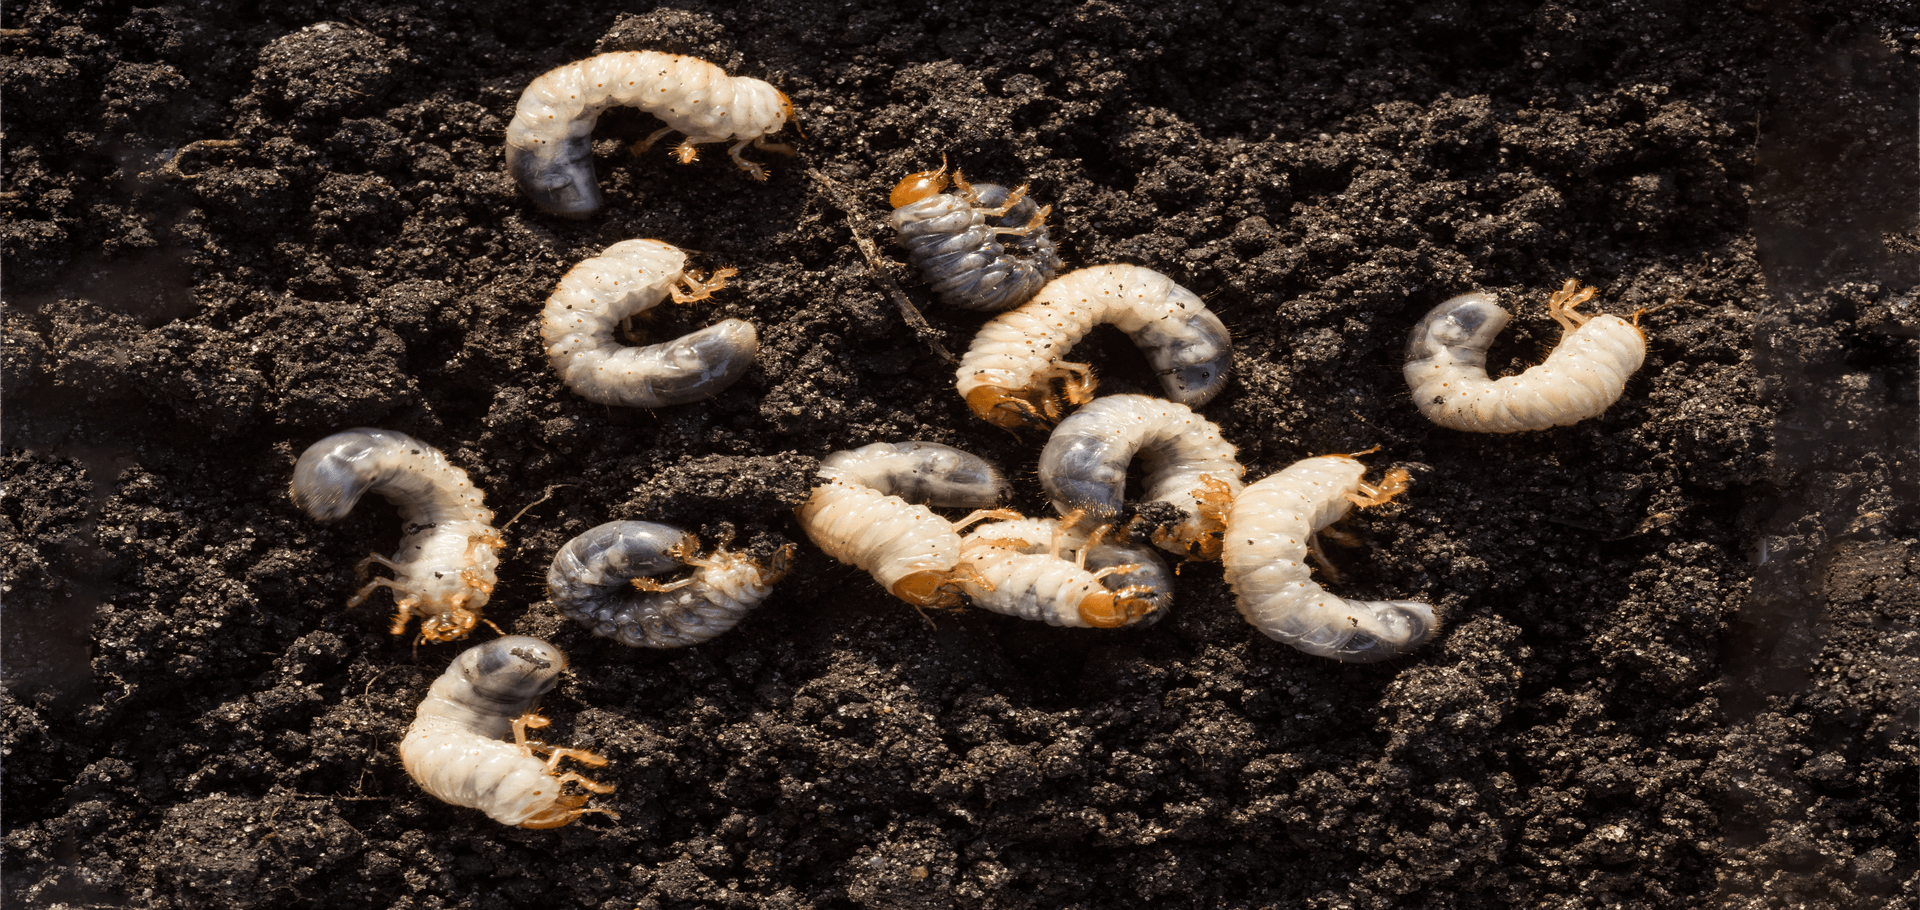 What is the best season to treat grubs?